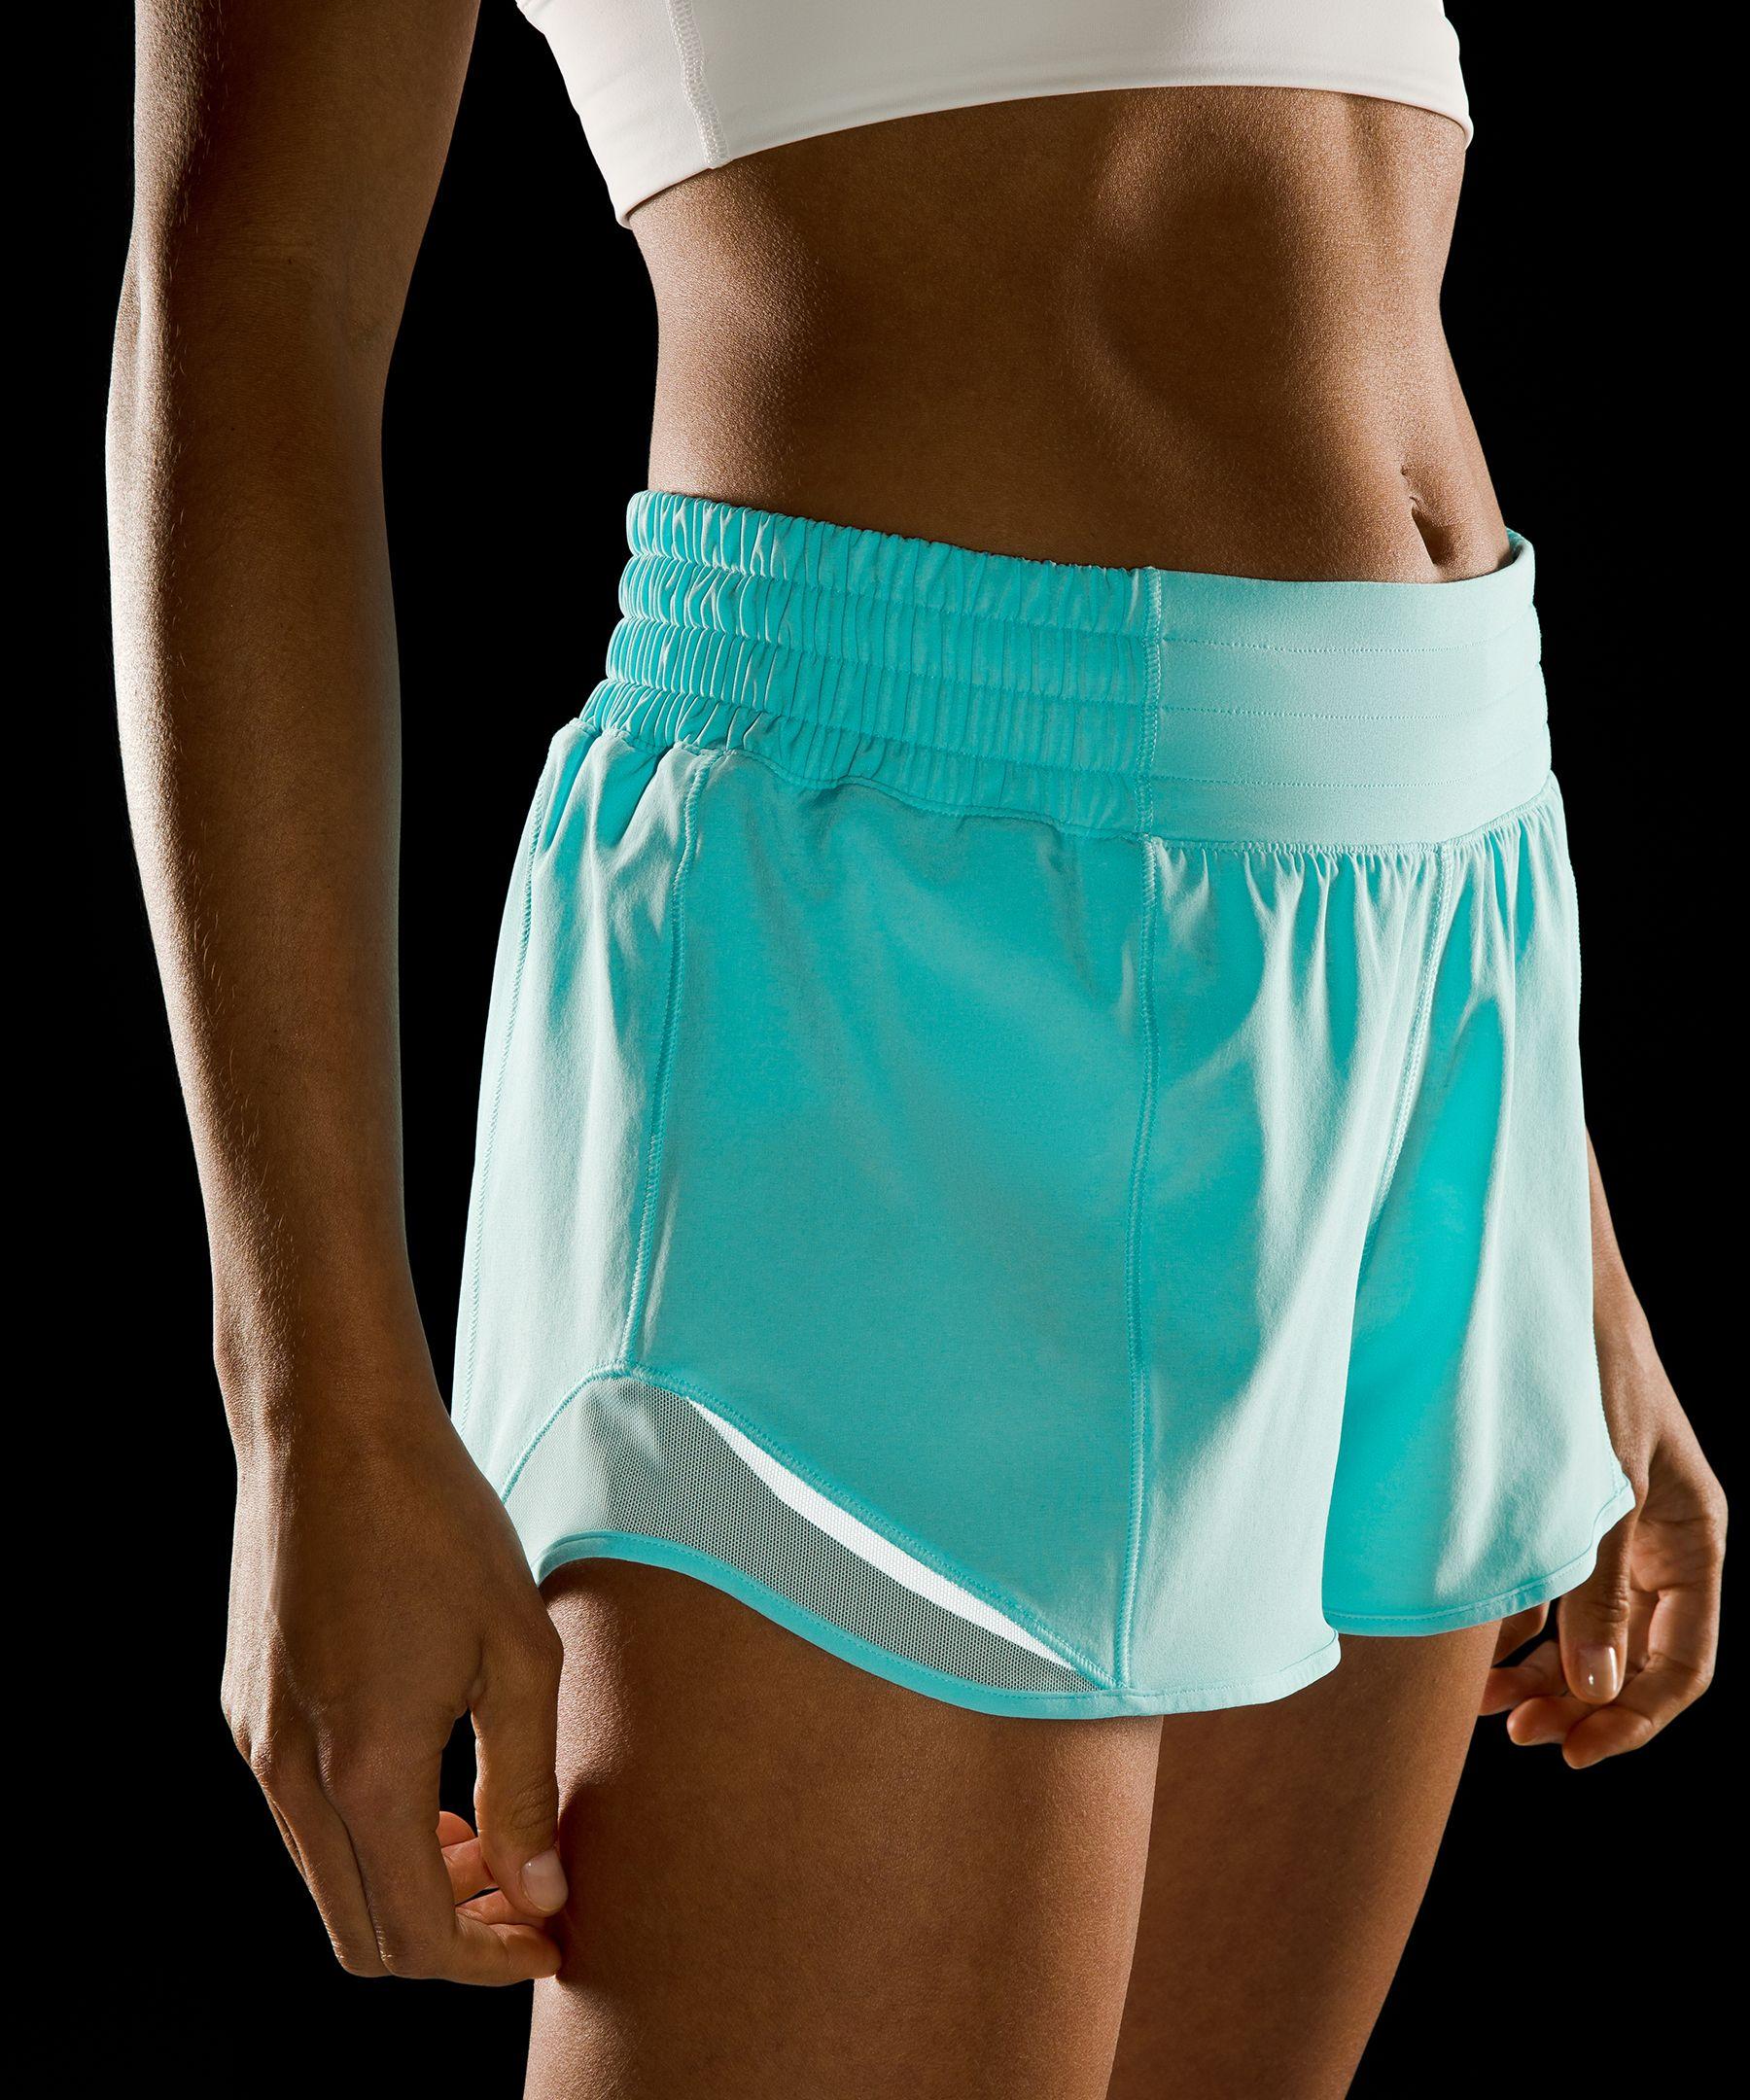 Lululemon Hotty Hot Low-Rise Lined Short 2.5”, Cyan Blue, NWT, Size 8